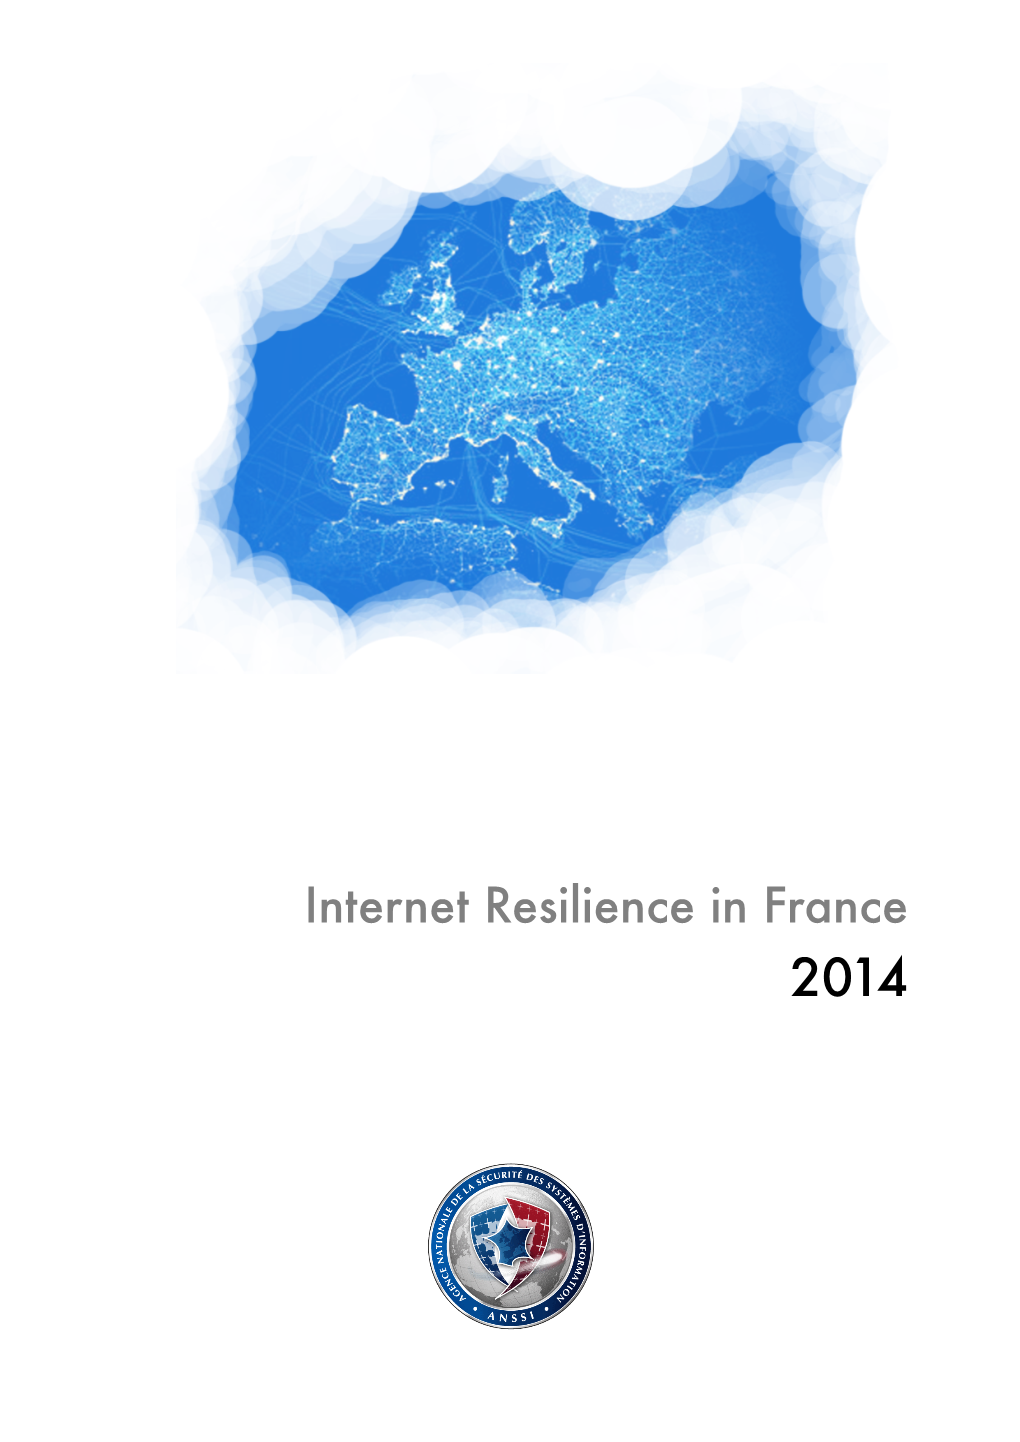 Internet Resilience in France – 2014 Report